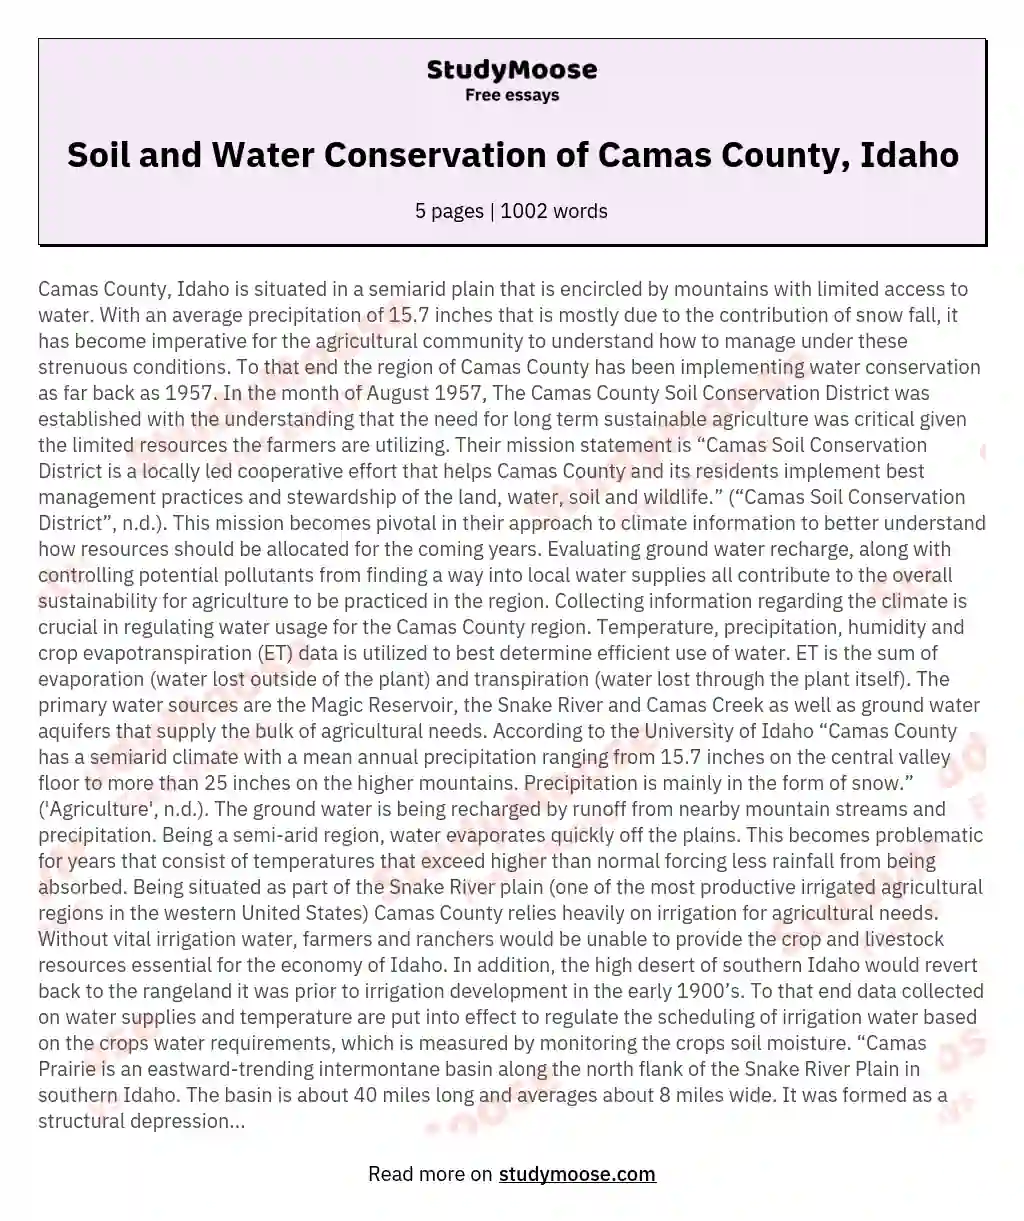 Soil and Water Conservation of Camas County, Idaho essay